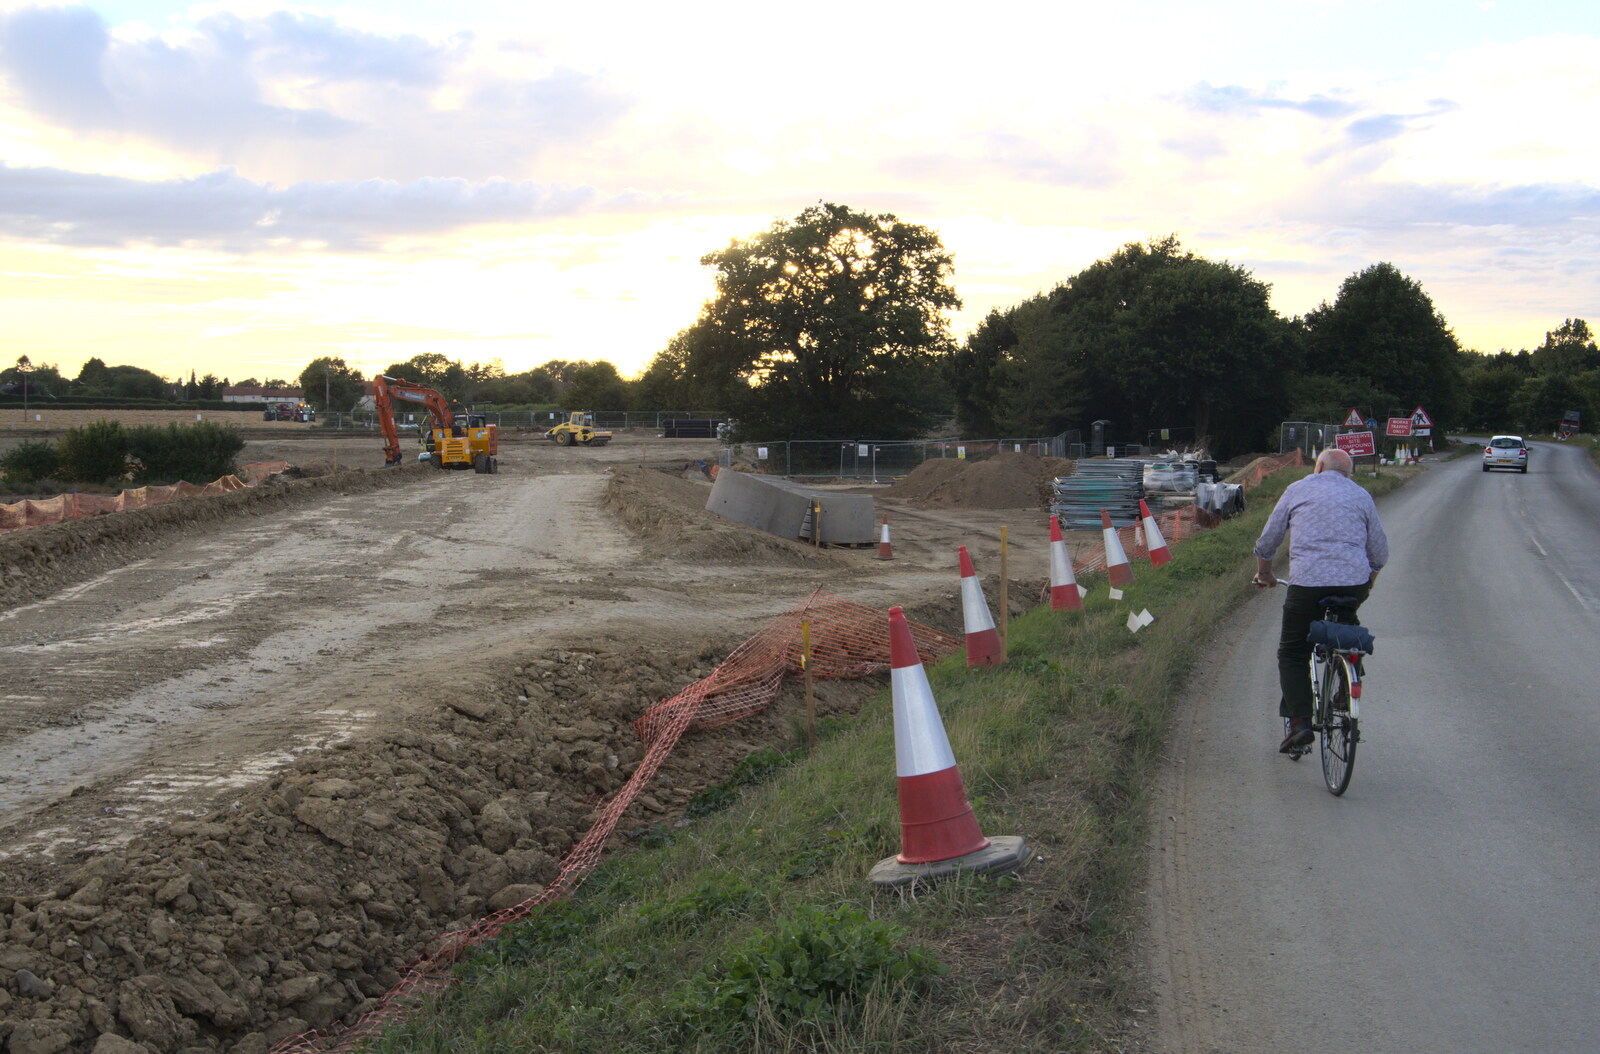 A new road is built up to the A140 from Eye Airfield with Mick the Brick, Eye, Suffolk - 5th August 2020